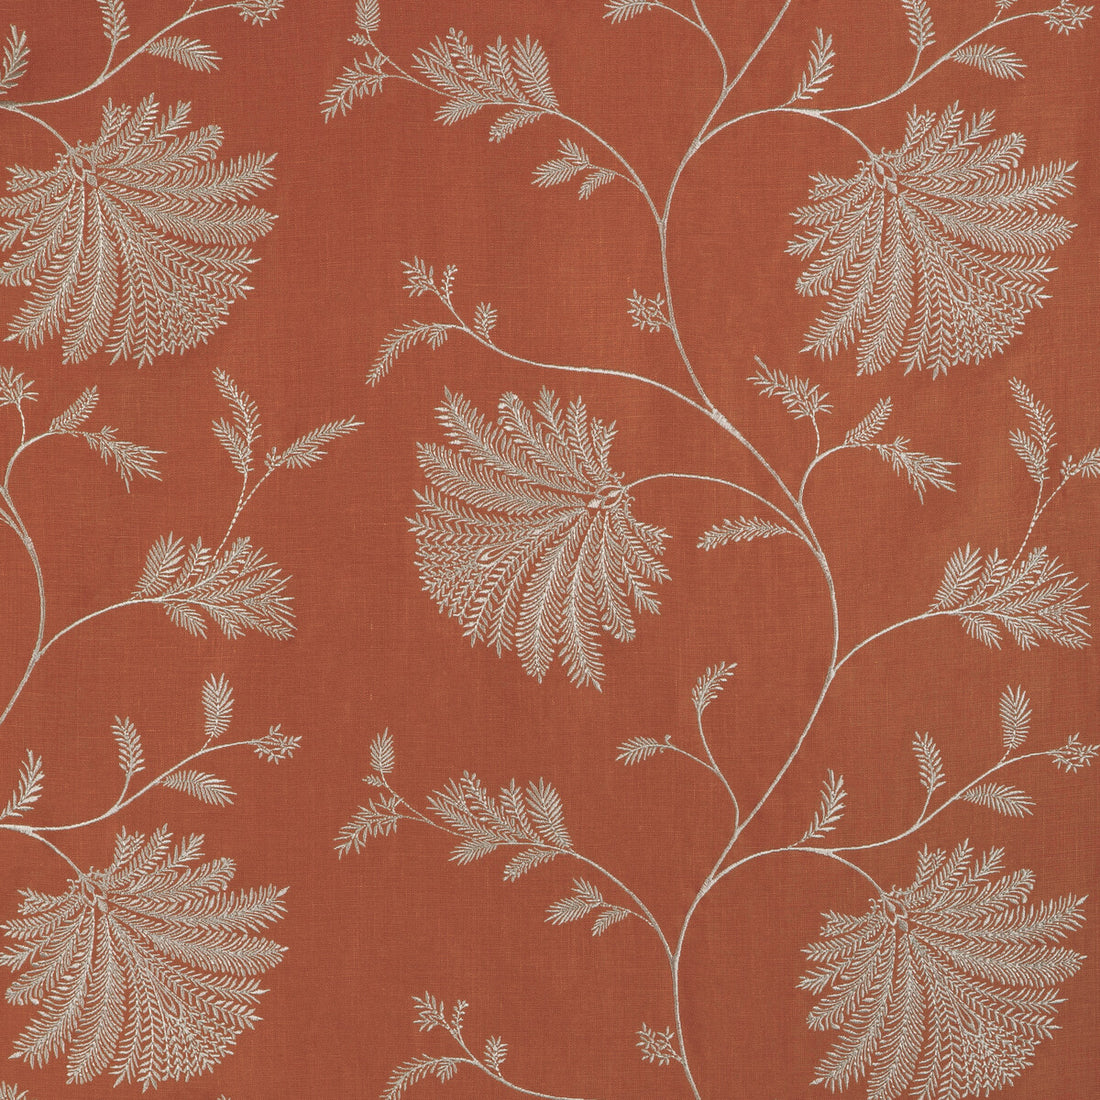 Maelle Emb fabric in terracotta color - pattern 8023116.12.0 - by Brunschwig &amp; Fils in the Anduze Embroideries collection